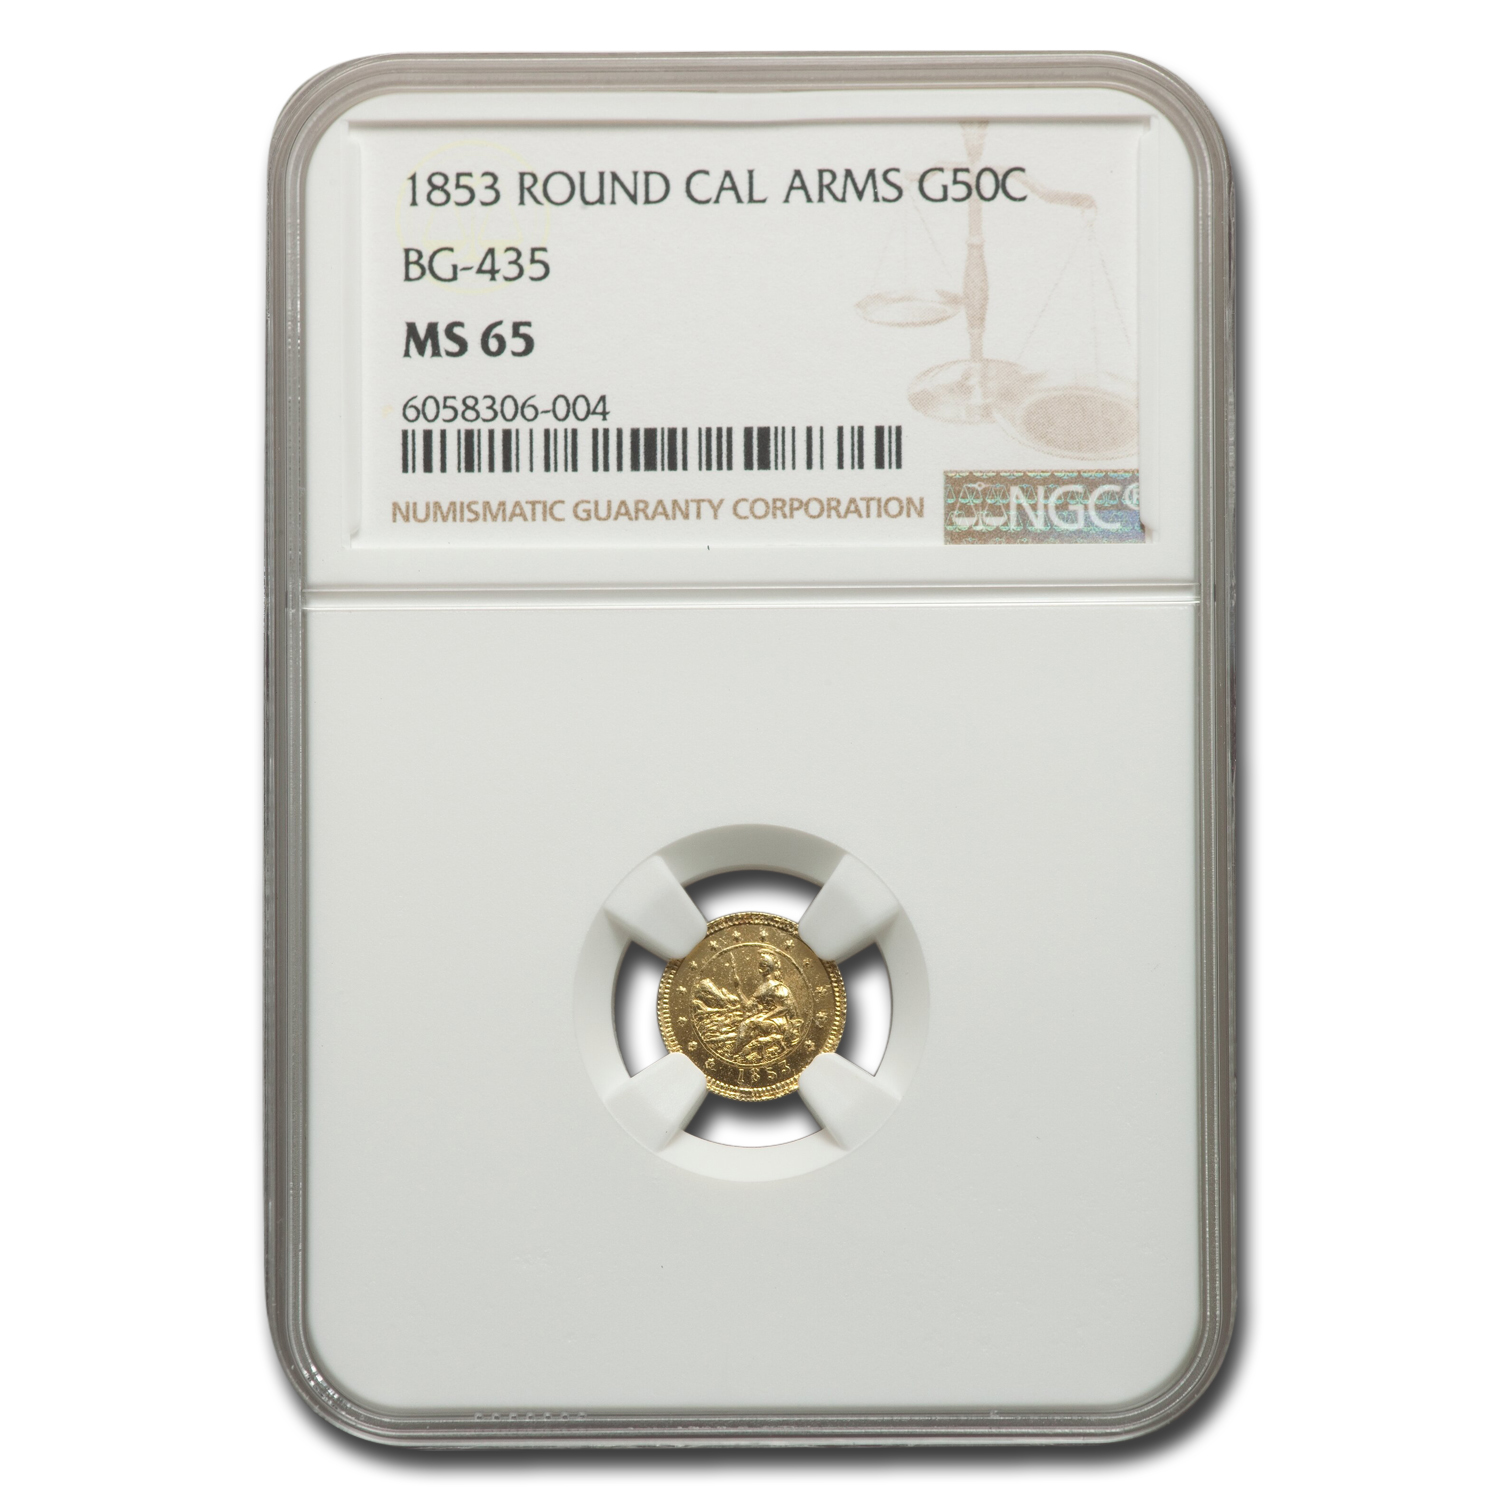 Buy 1853 California Arms Round 50 Cent Gold MS-65 NGC (BG-435)